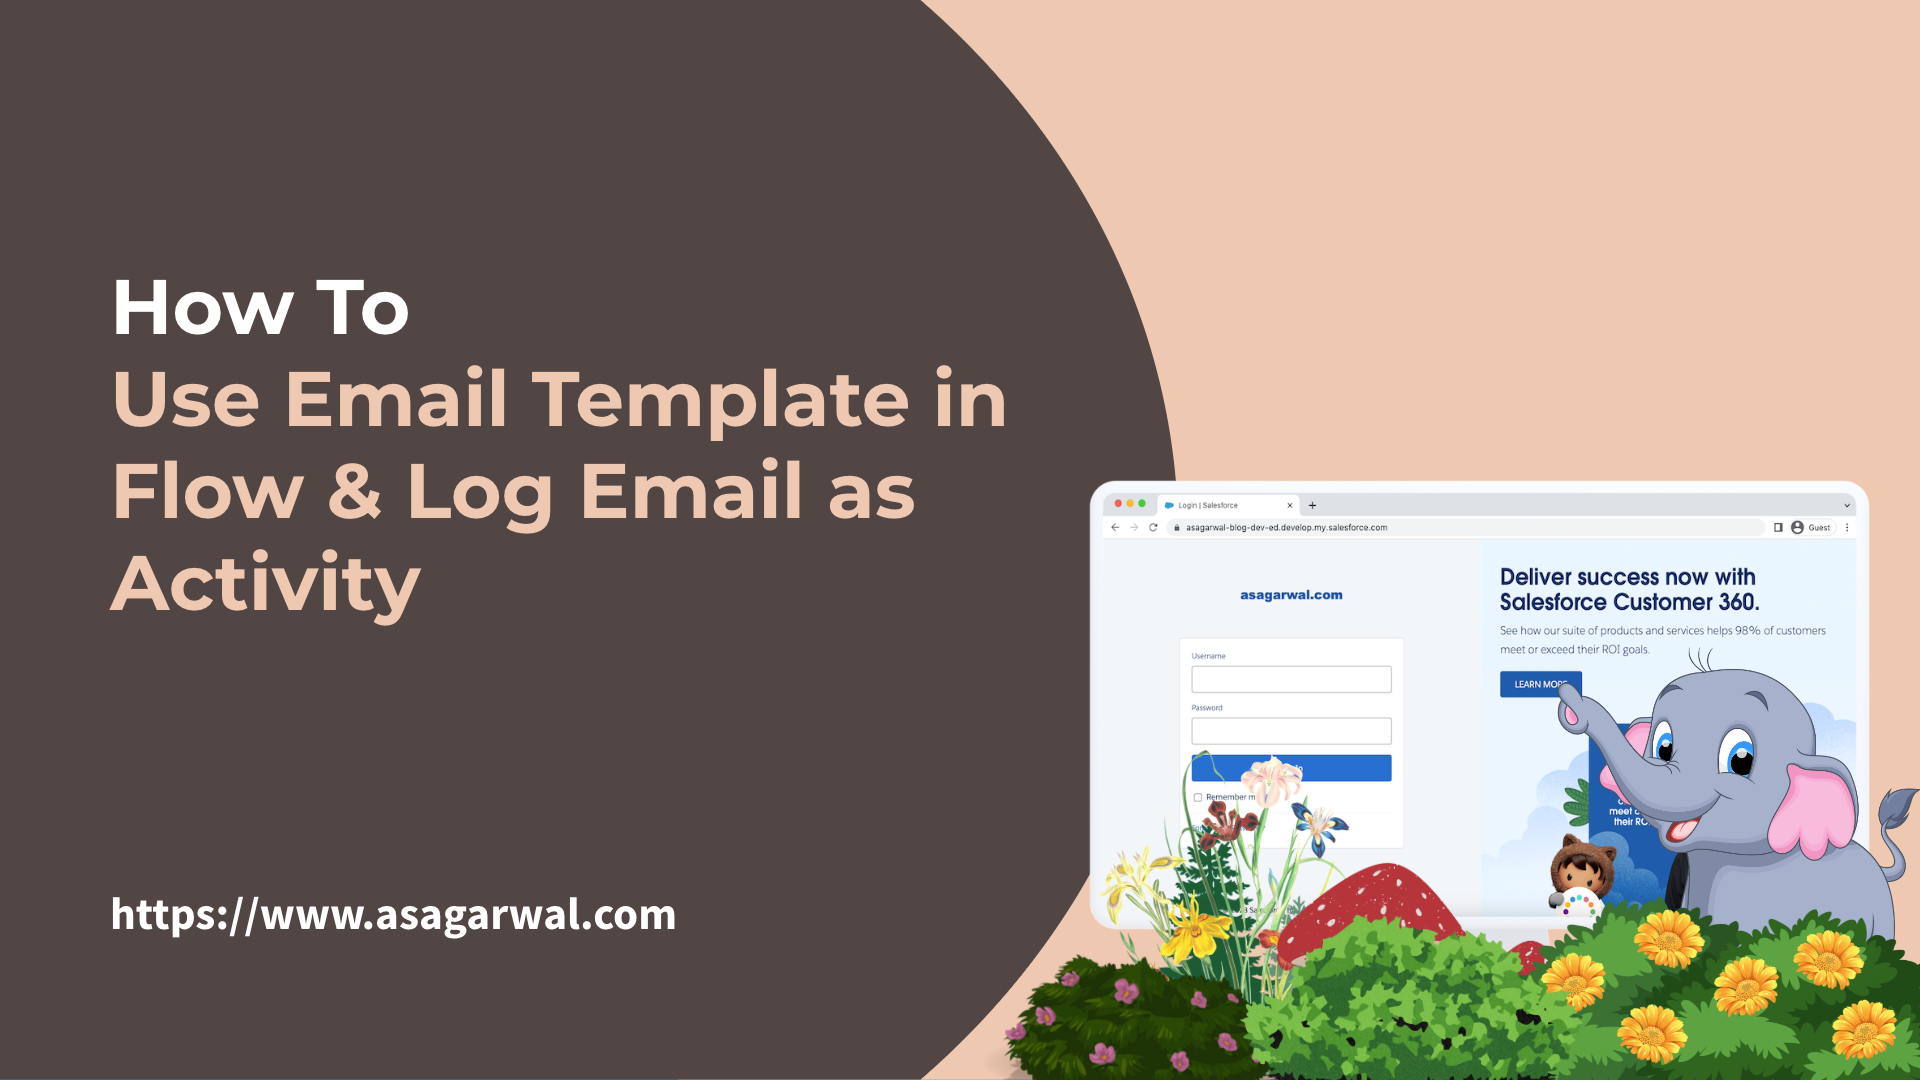 How to Use Email Template in Flow & Log Email as Activity